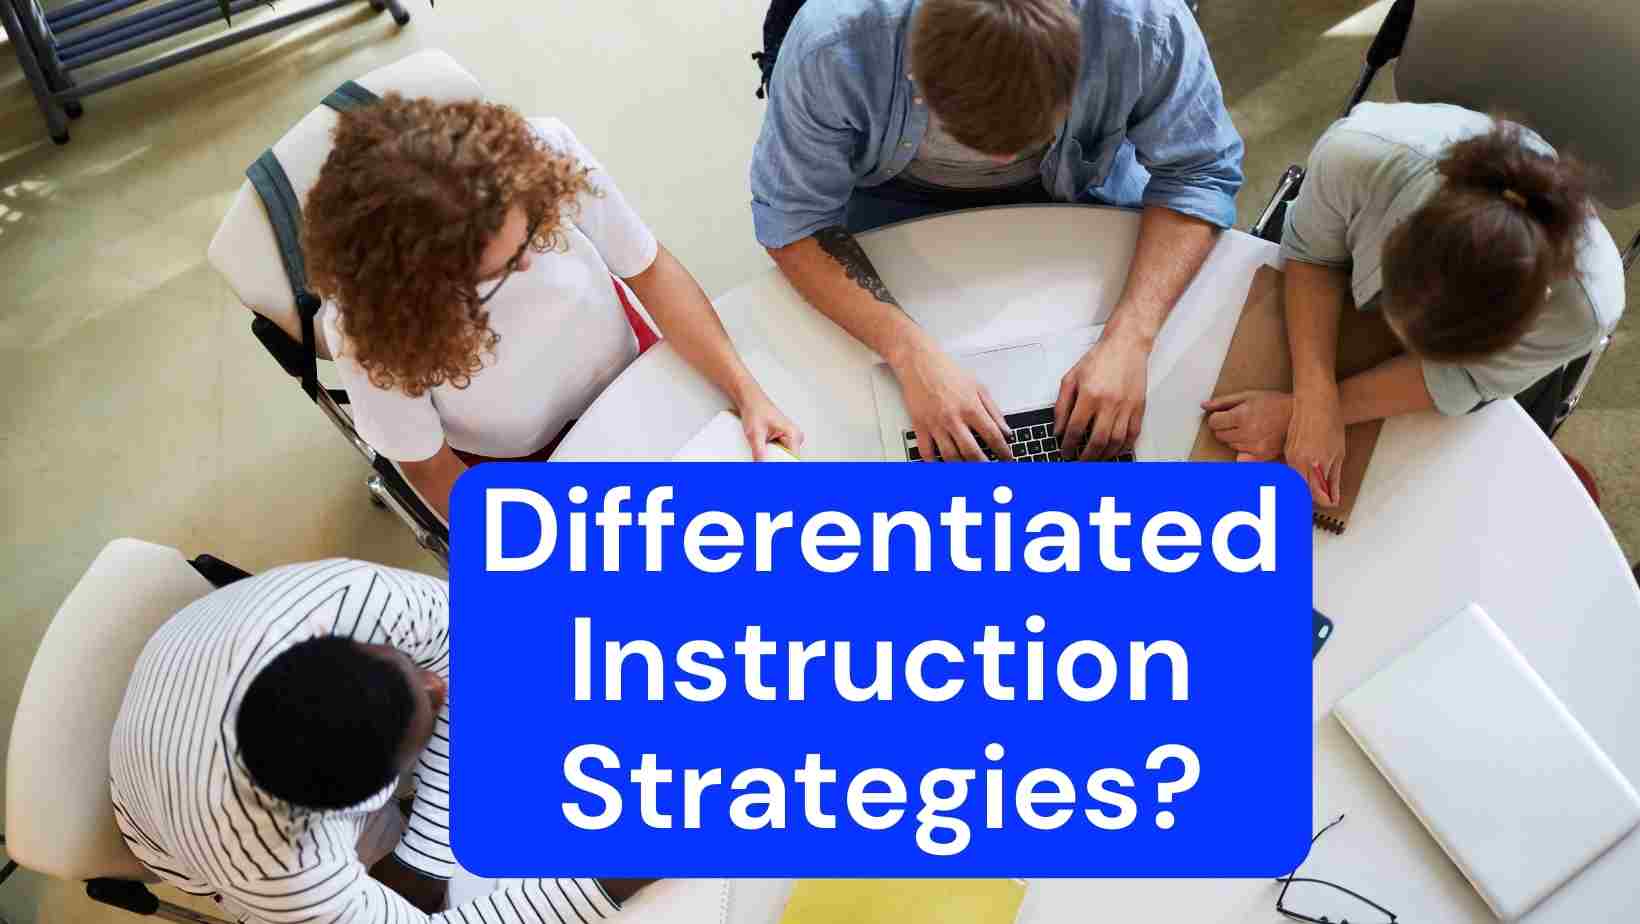 What are Differentiated Instruction Strategies?